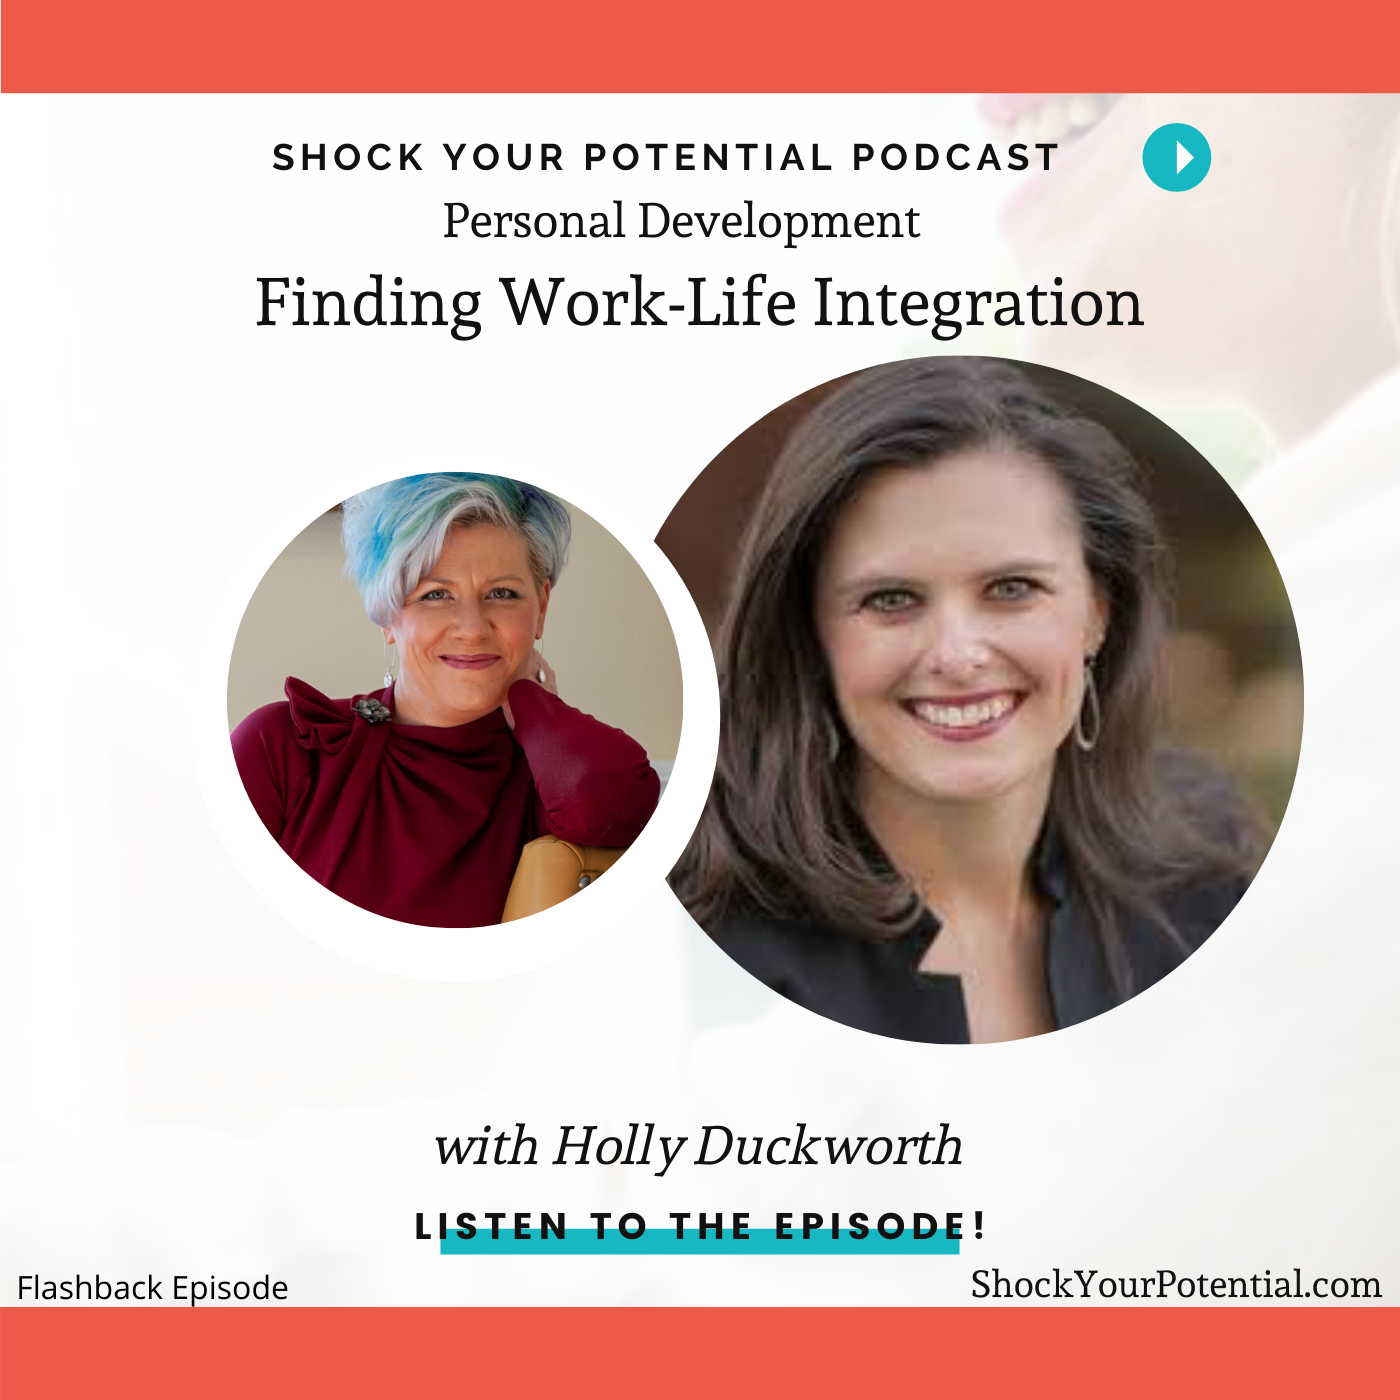 Finding Work-Life Integration – Holly Duckworth